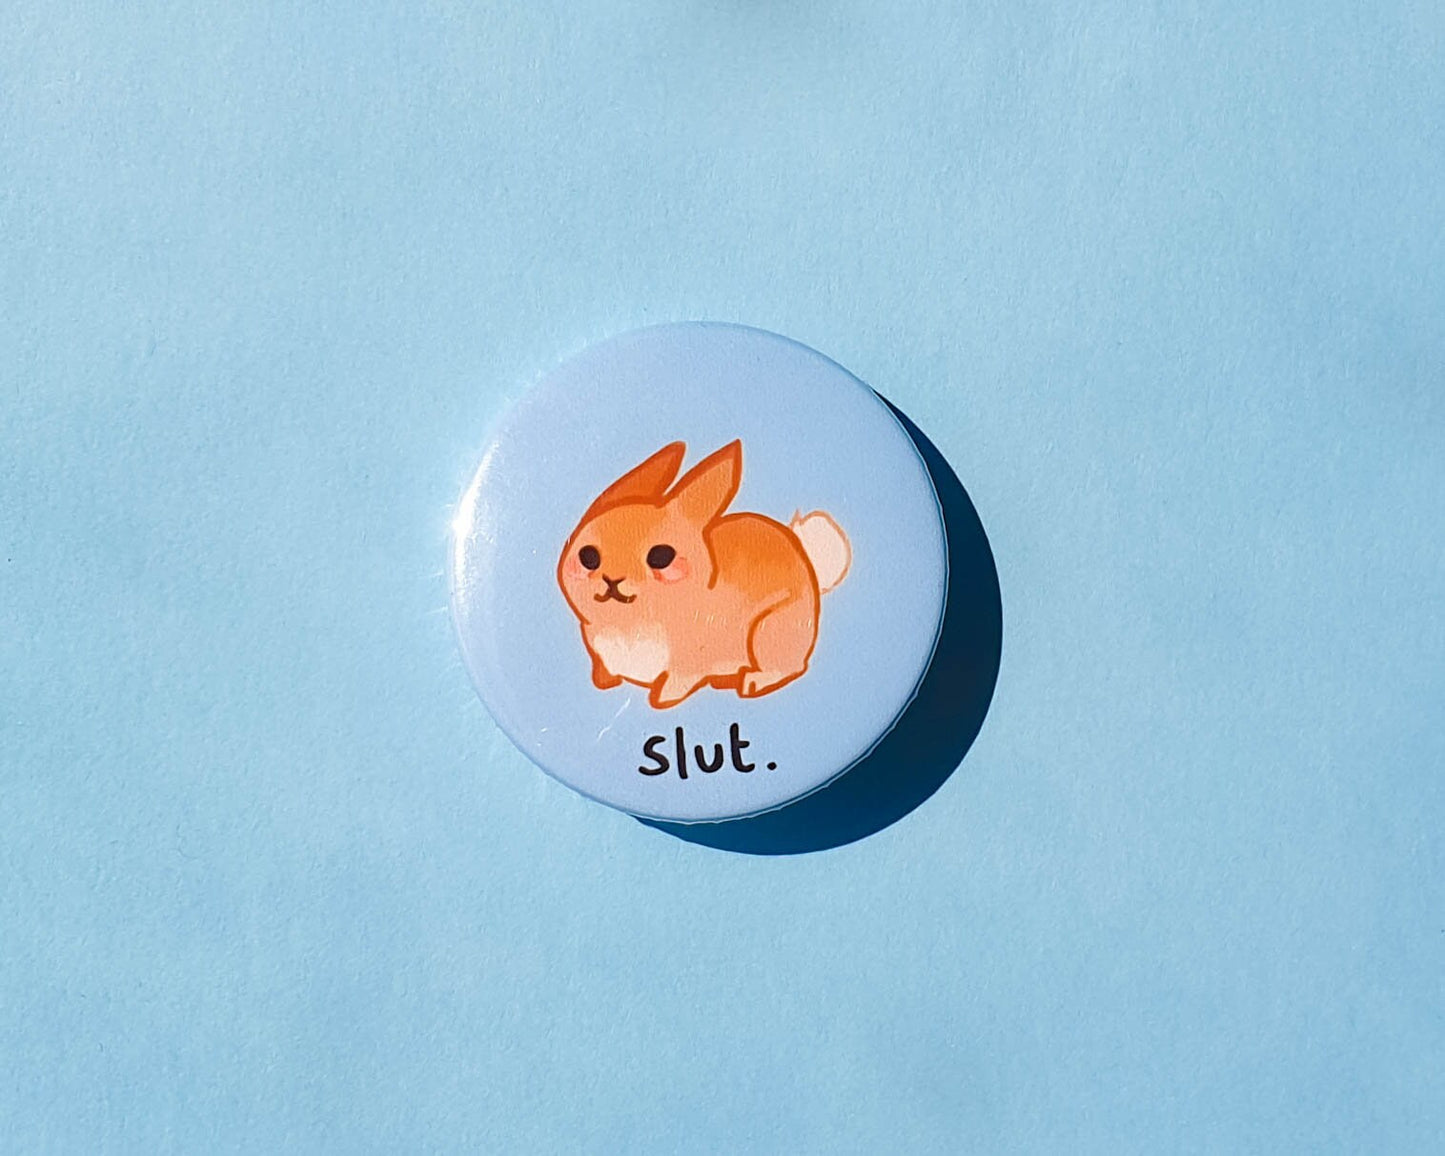 Rude Animal Pinback Buttons